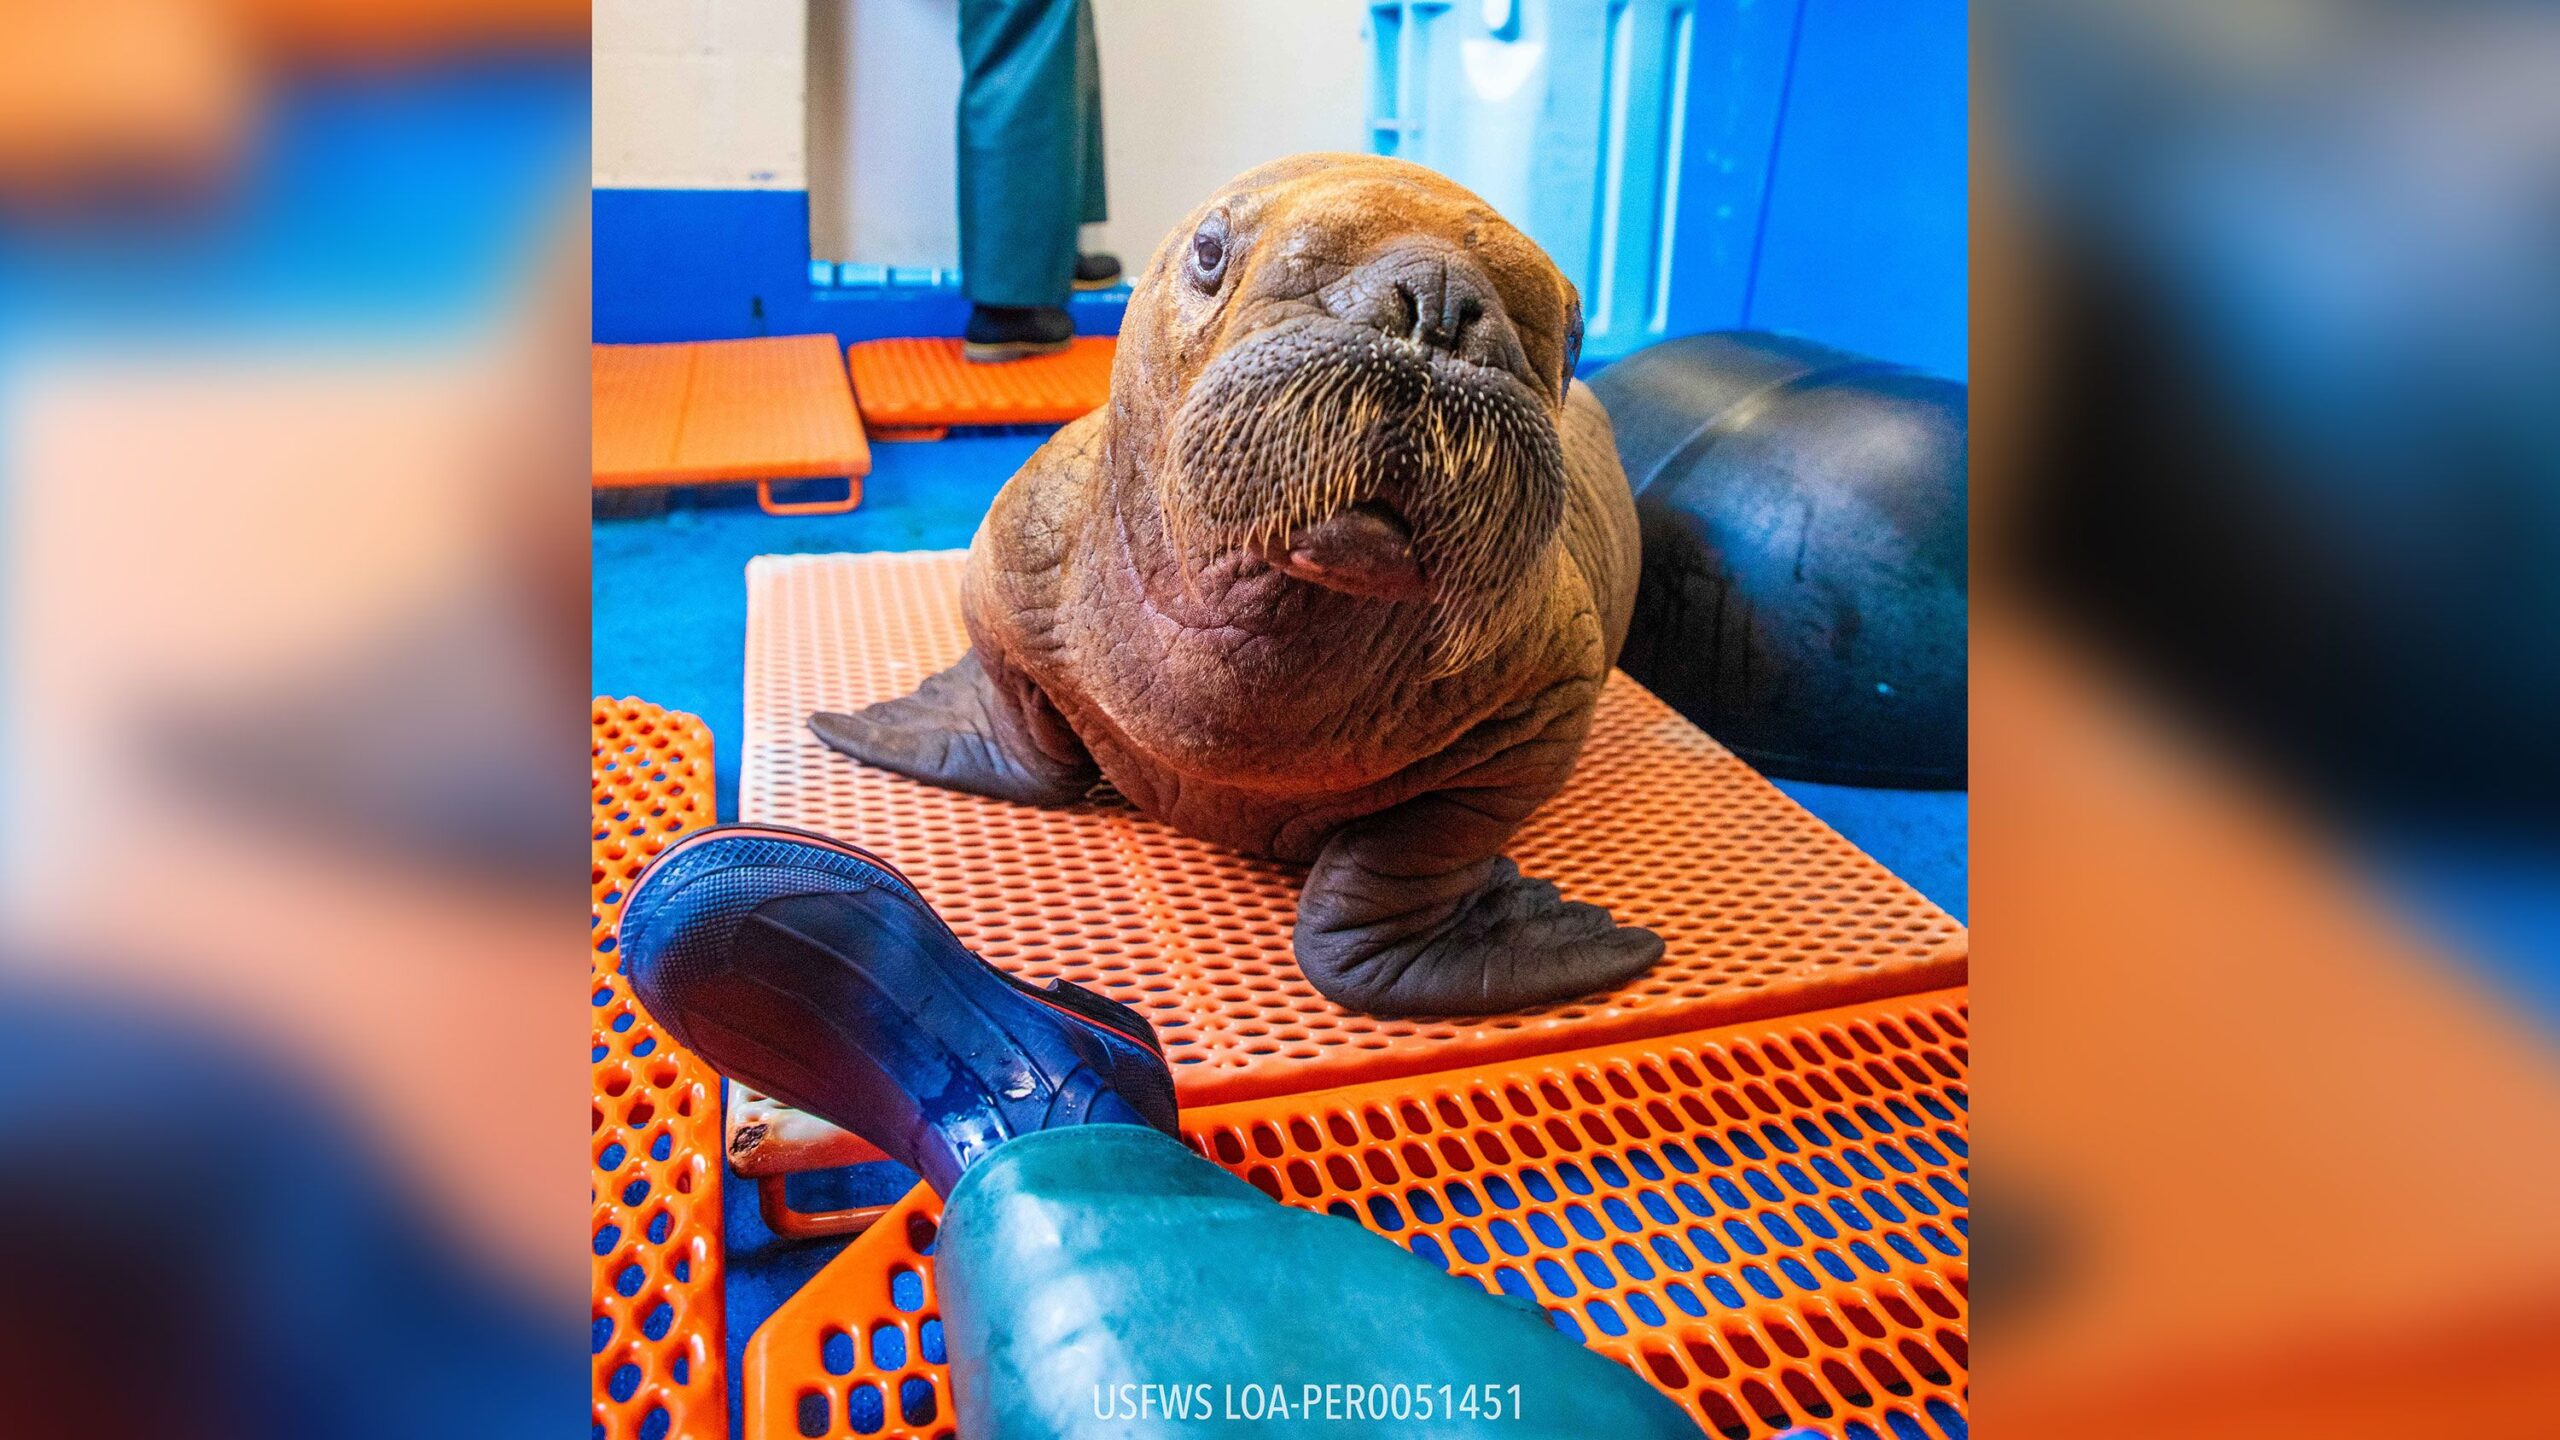 The walrus is receiving cuddle care after he was found in an unusual spot in Alaska. (Alaska SeaLif...